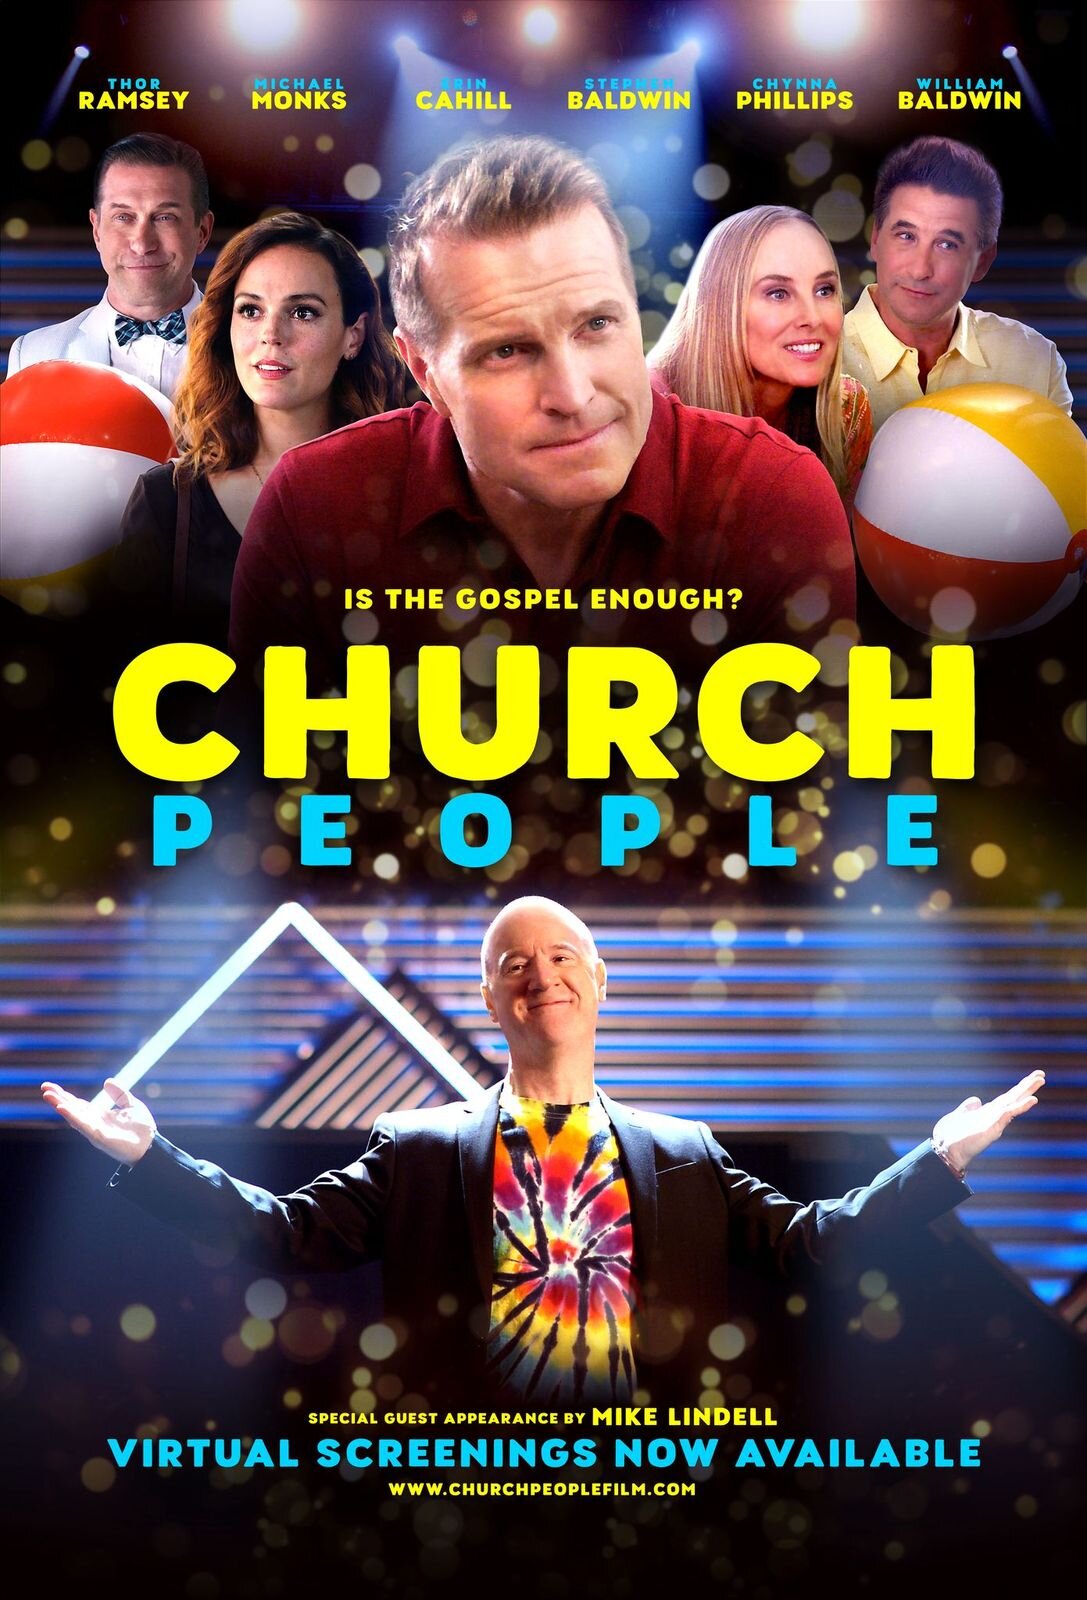 CHURCH PEOPLE, Comedy Movie Starring Stephen Baldwin and Thor Ramsey, Launches On-Demand and Virtual Screenings — A